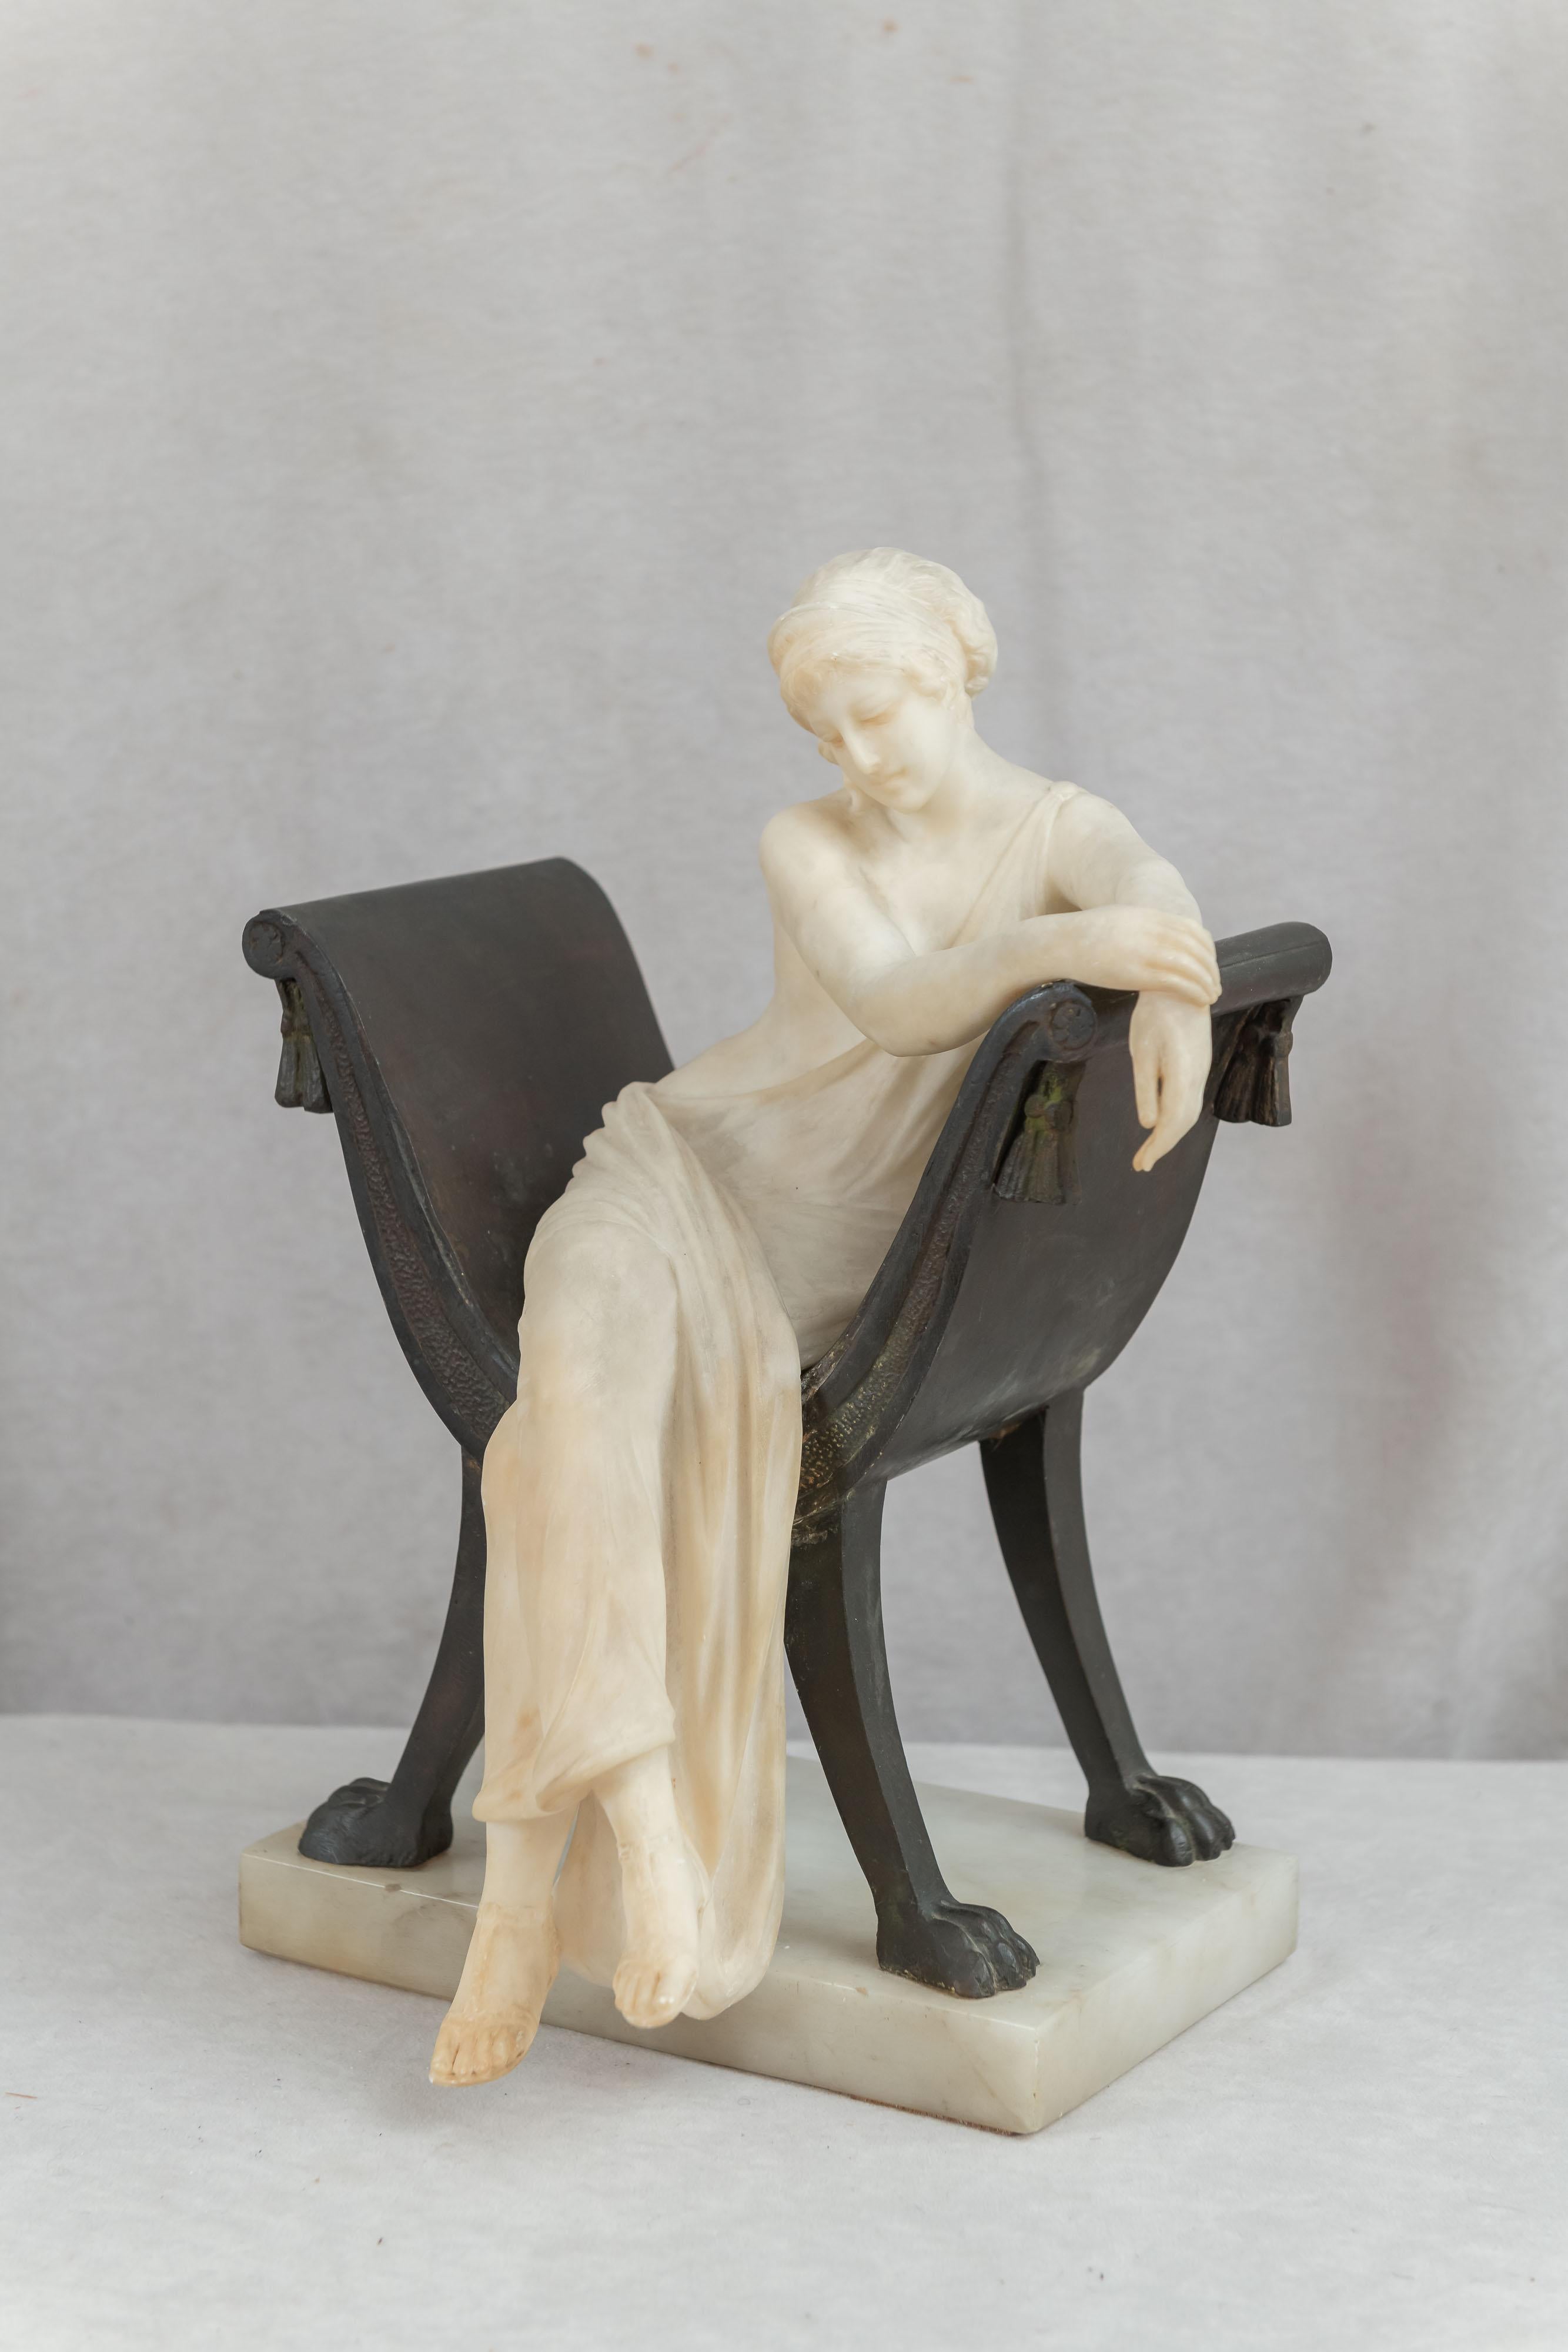 20th Century Carved Alabaster Lady Seated in a Bronze Chair, Artist Signed, Italian, ca. 1900